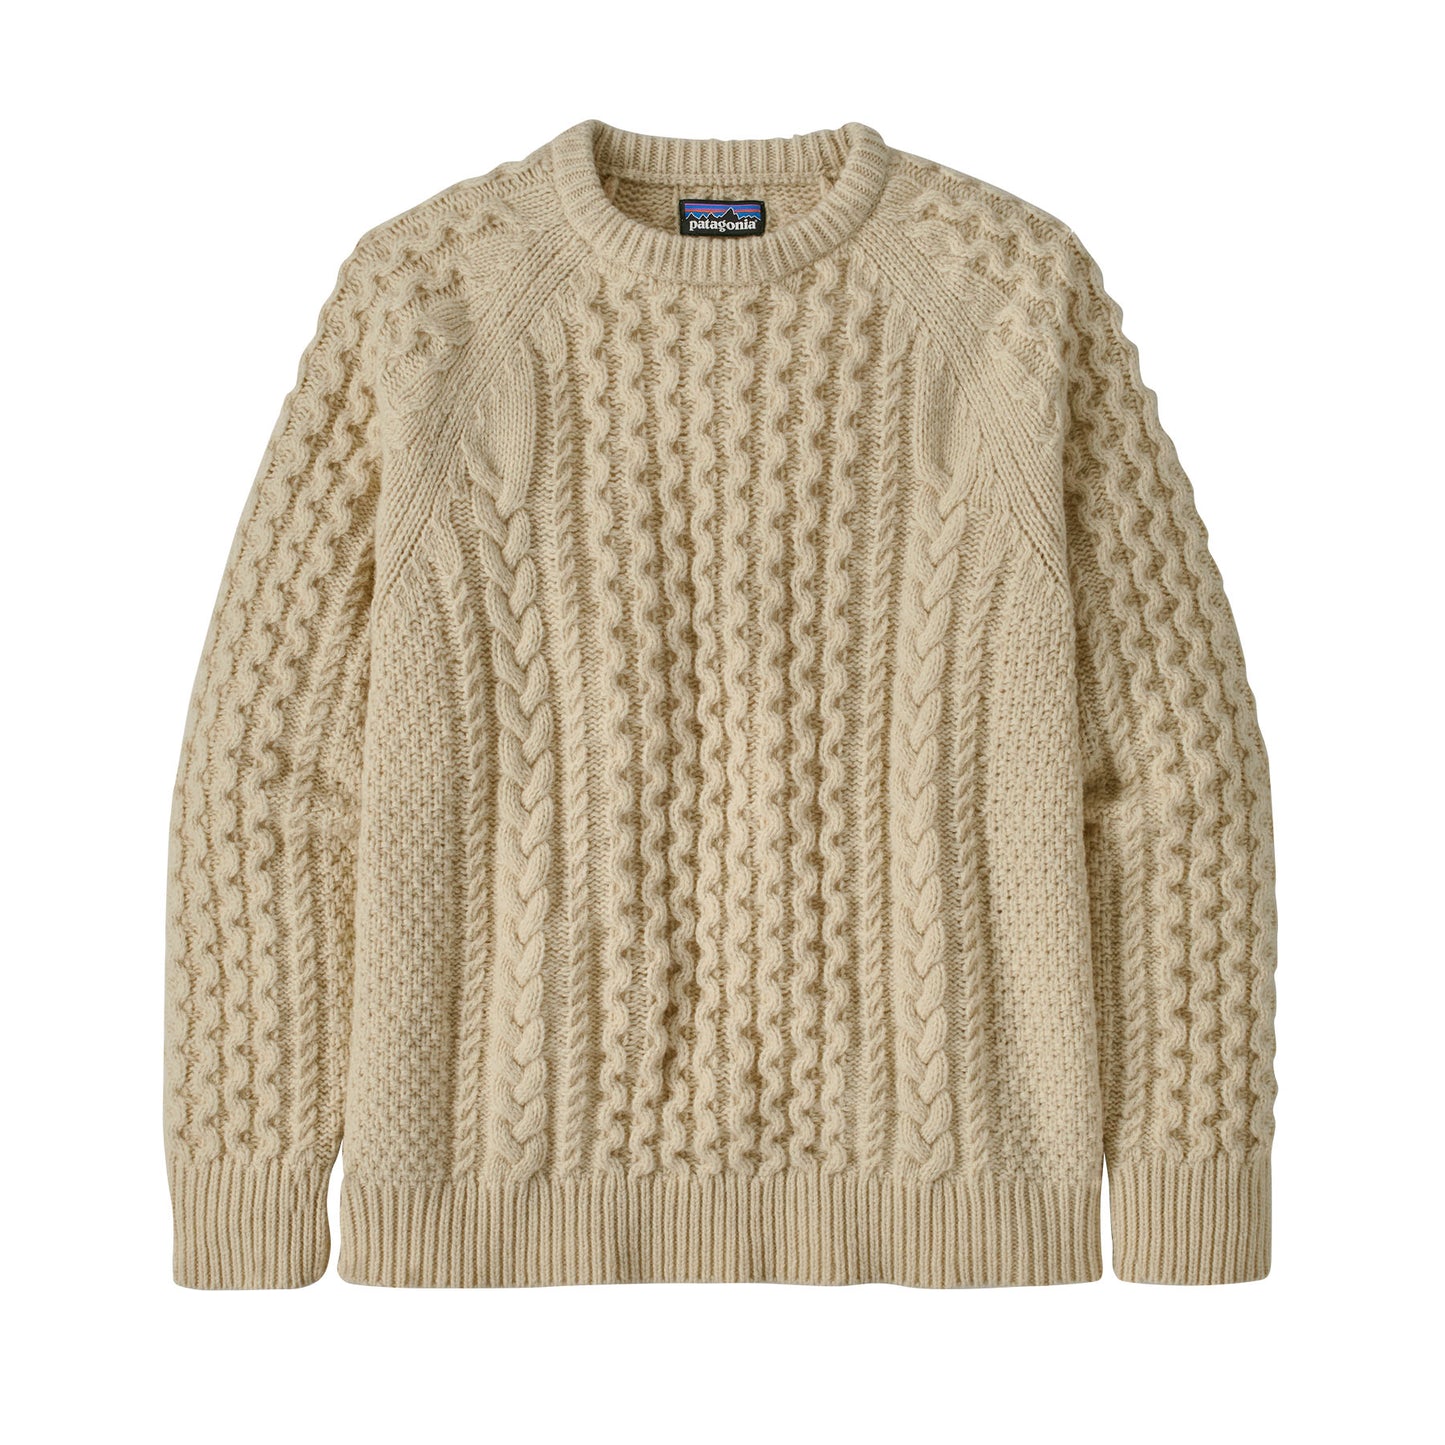 Patagonia Recycled Wool-Blend Cable Knit Crew